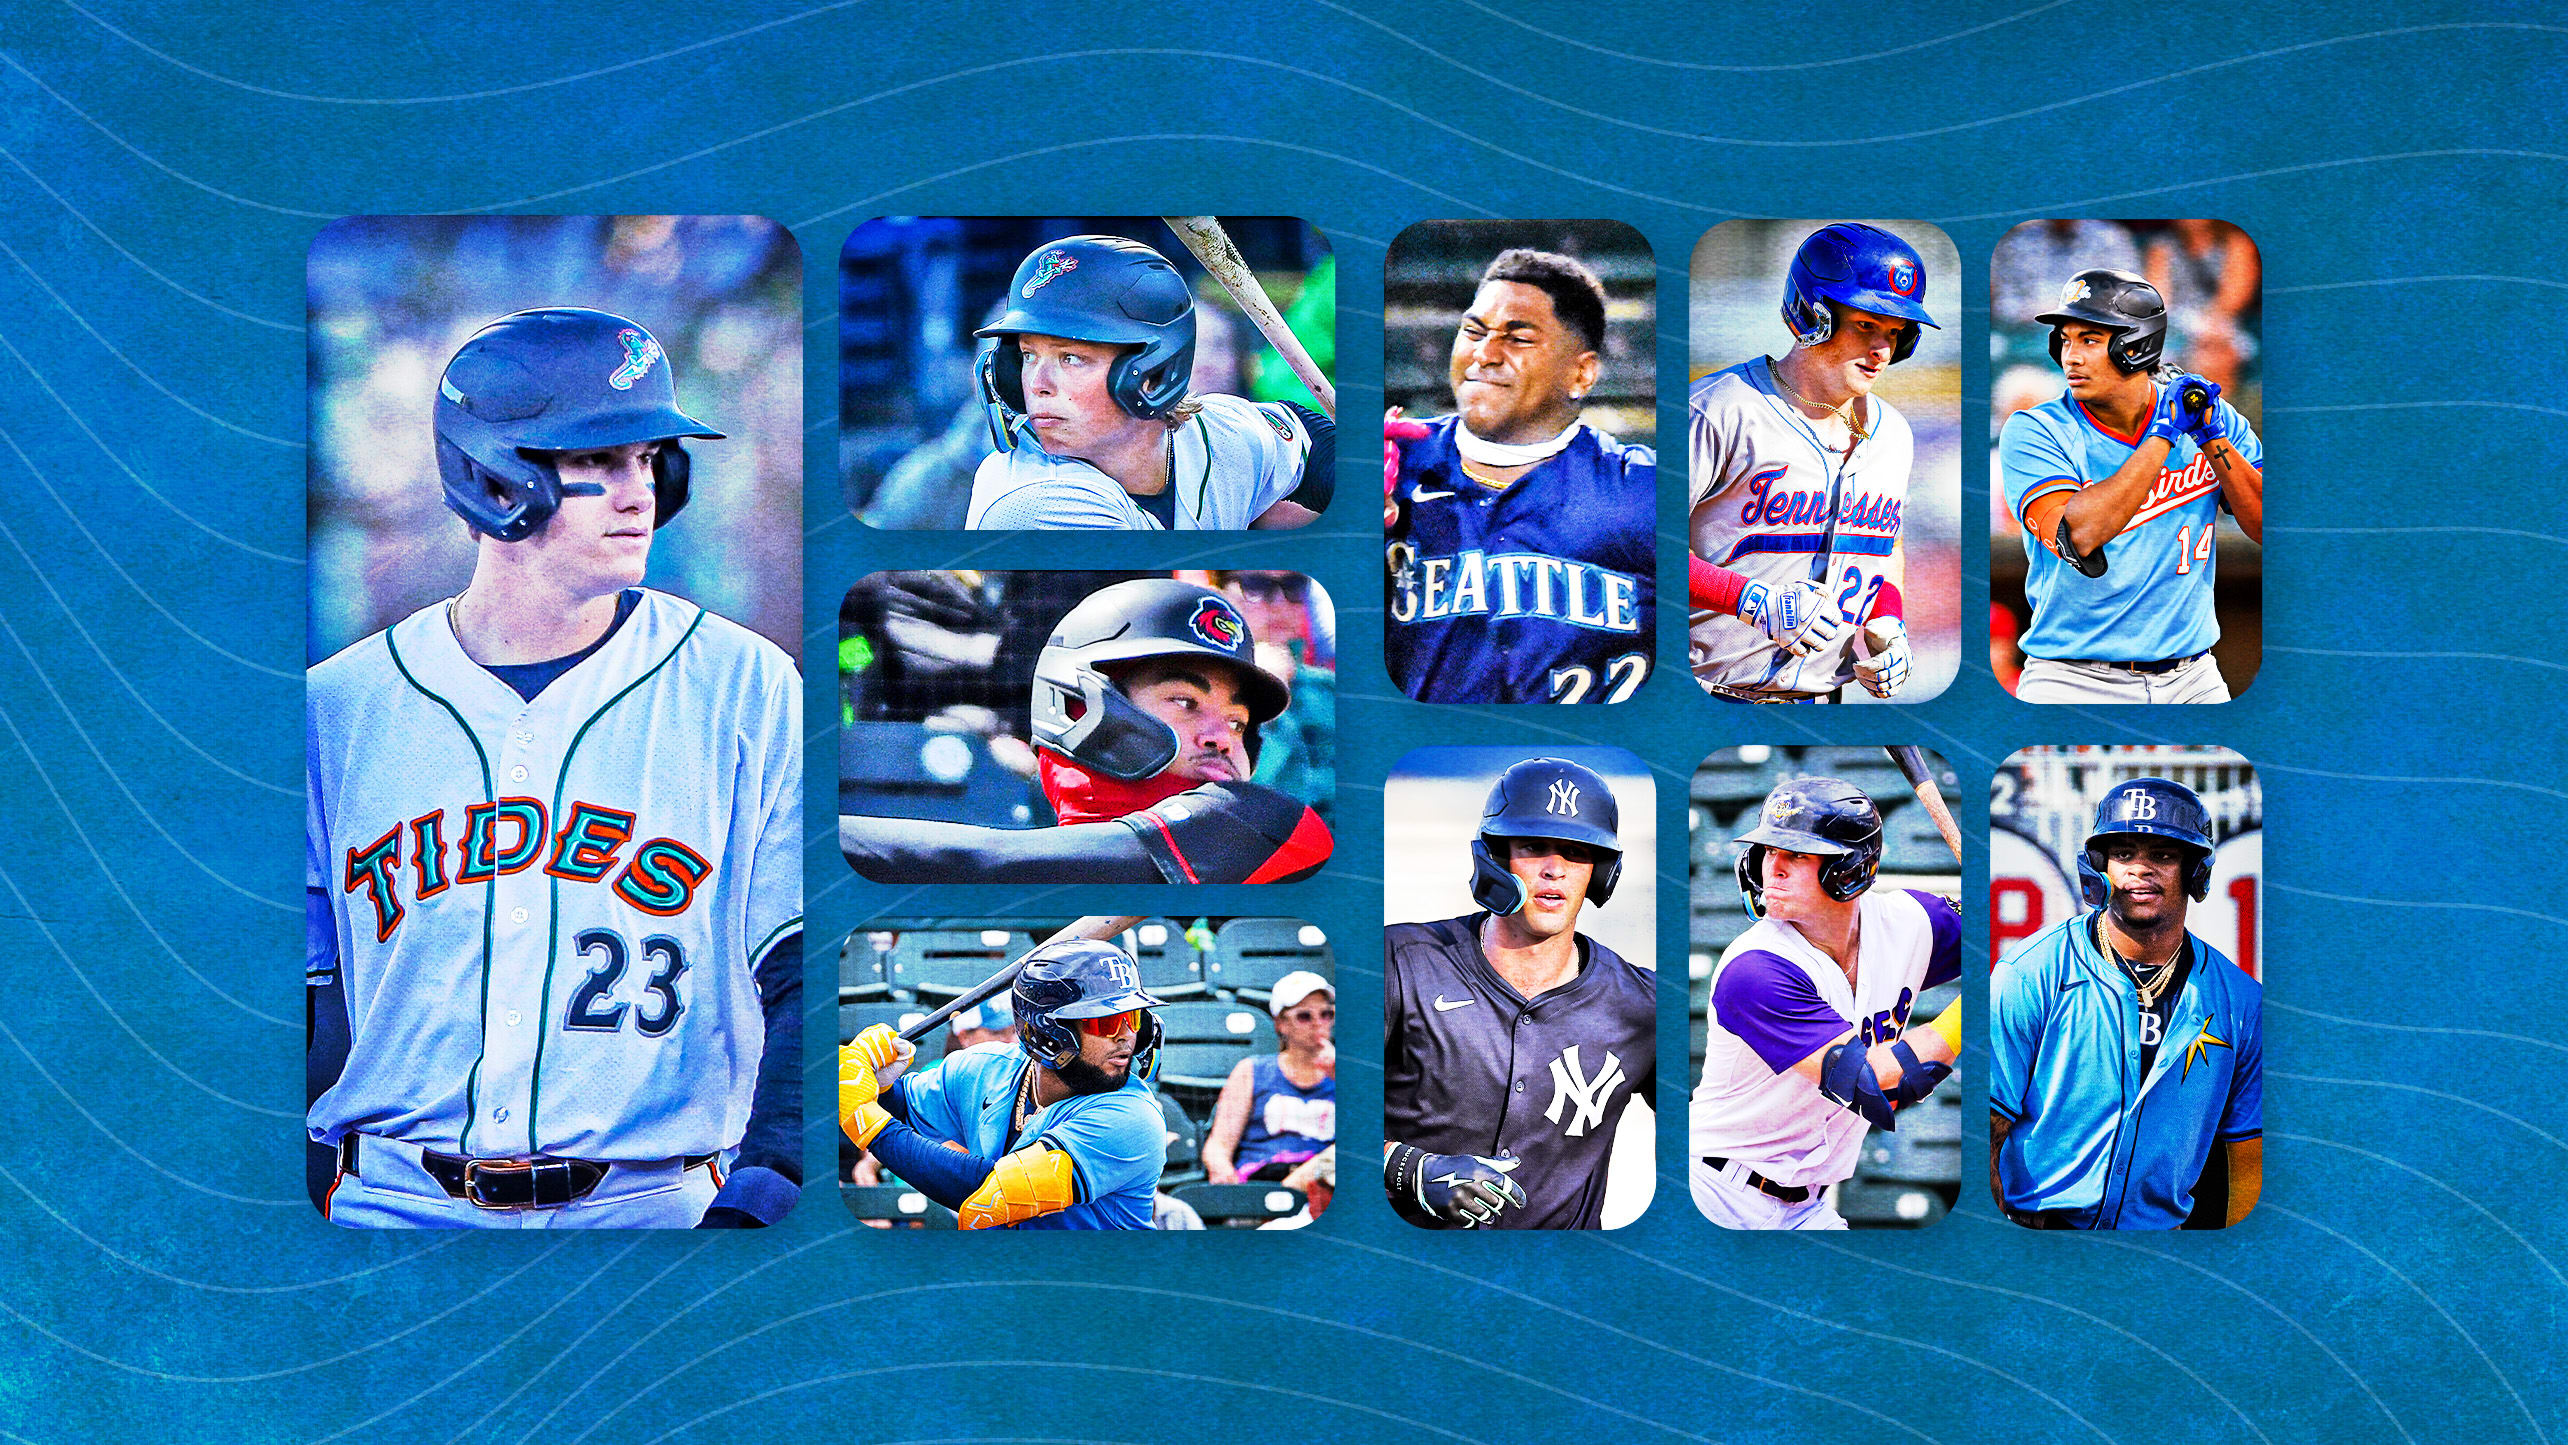 These 10 prospects can hit the ball a long way